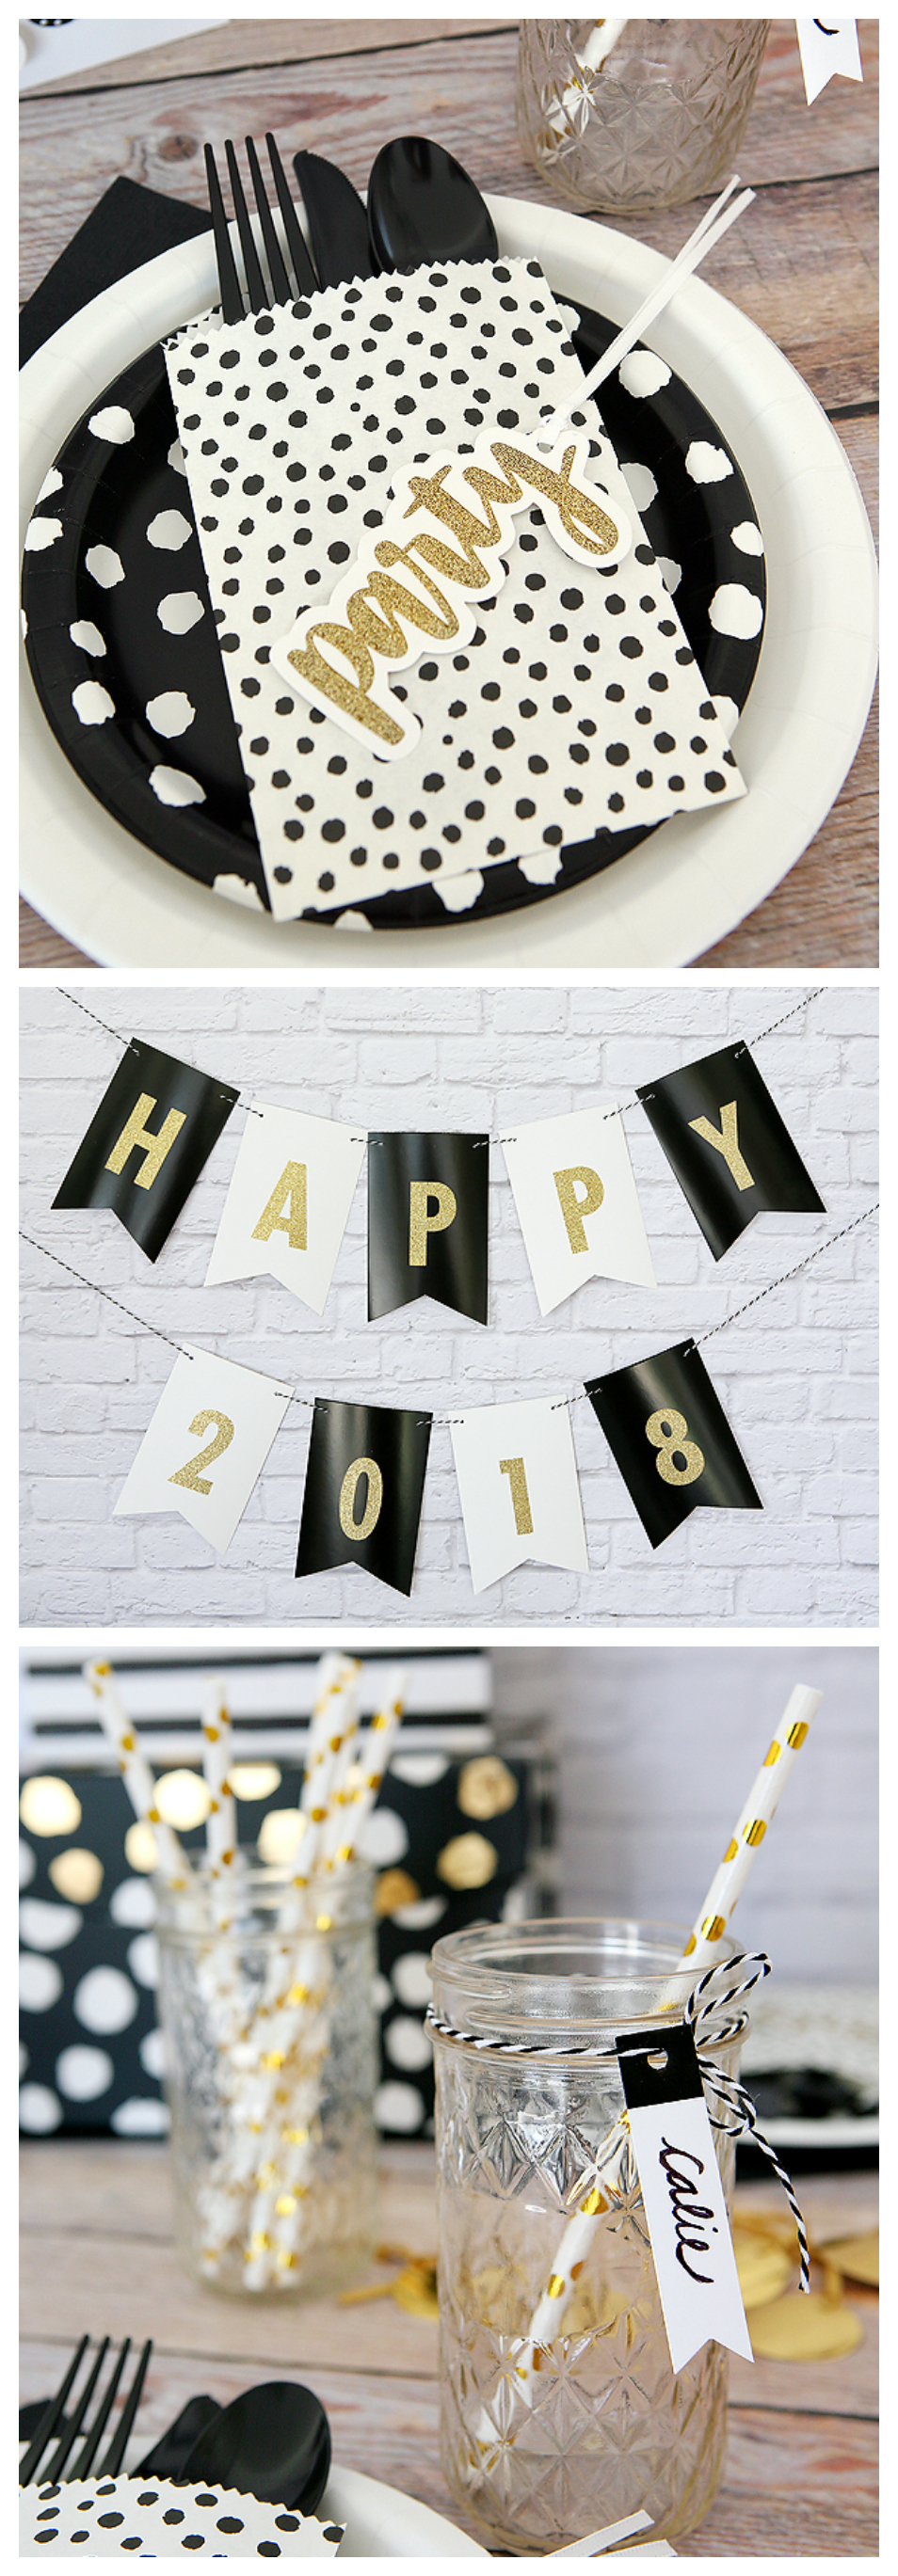 New Years Party Ideas - New Years Party Decorations